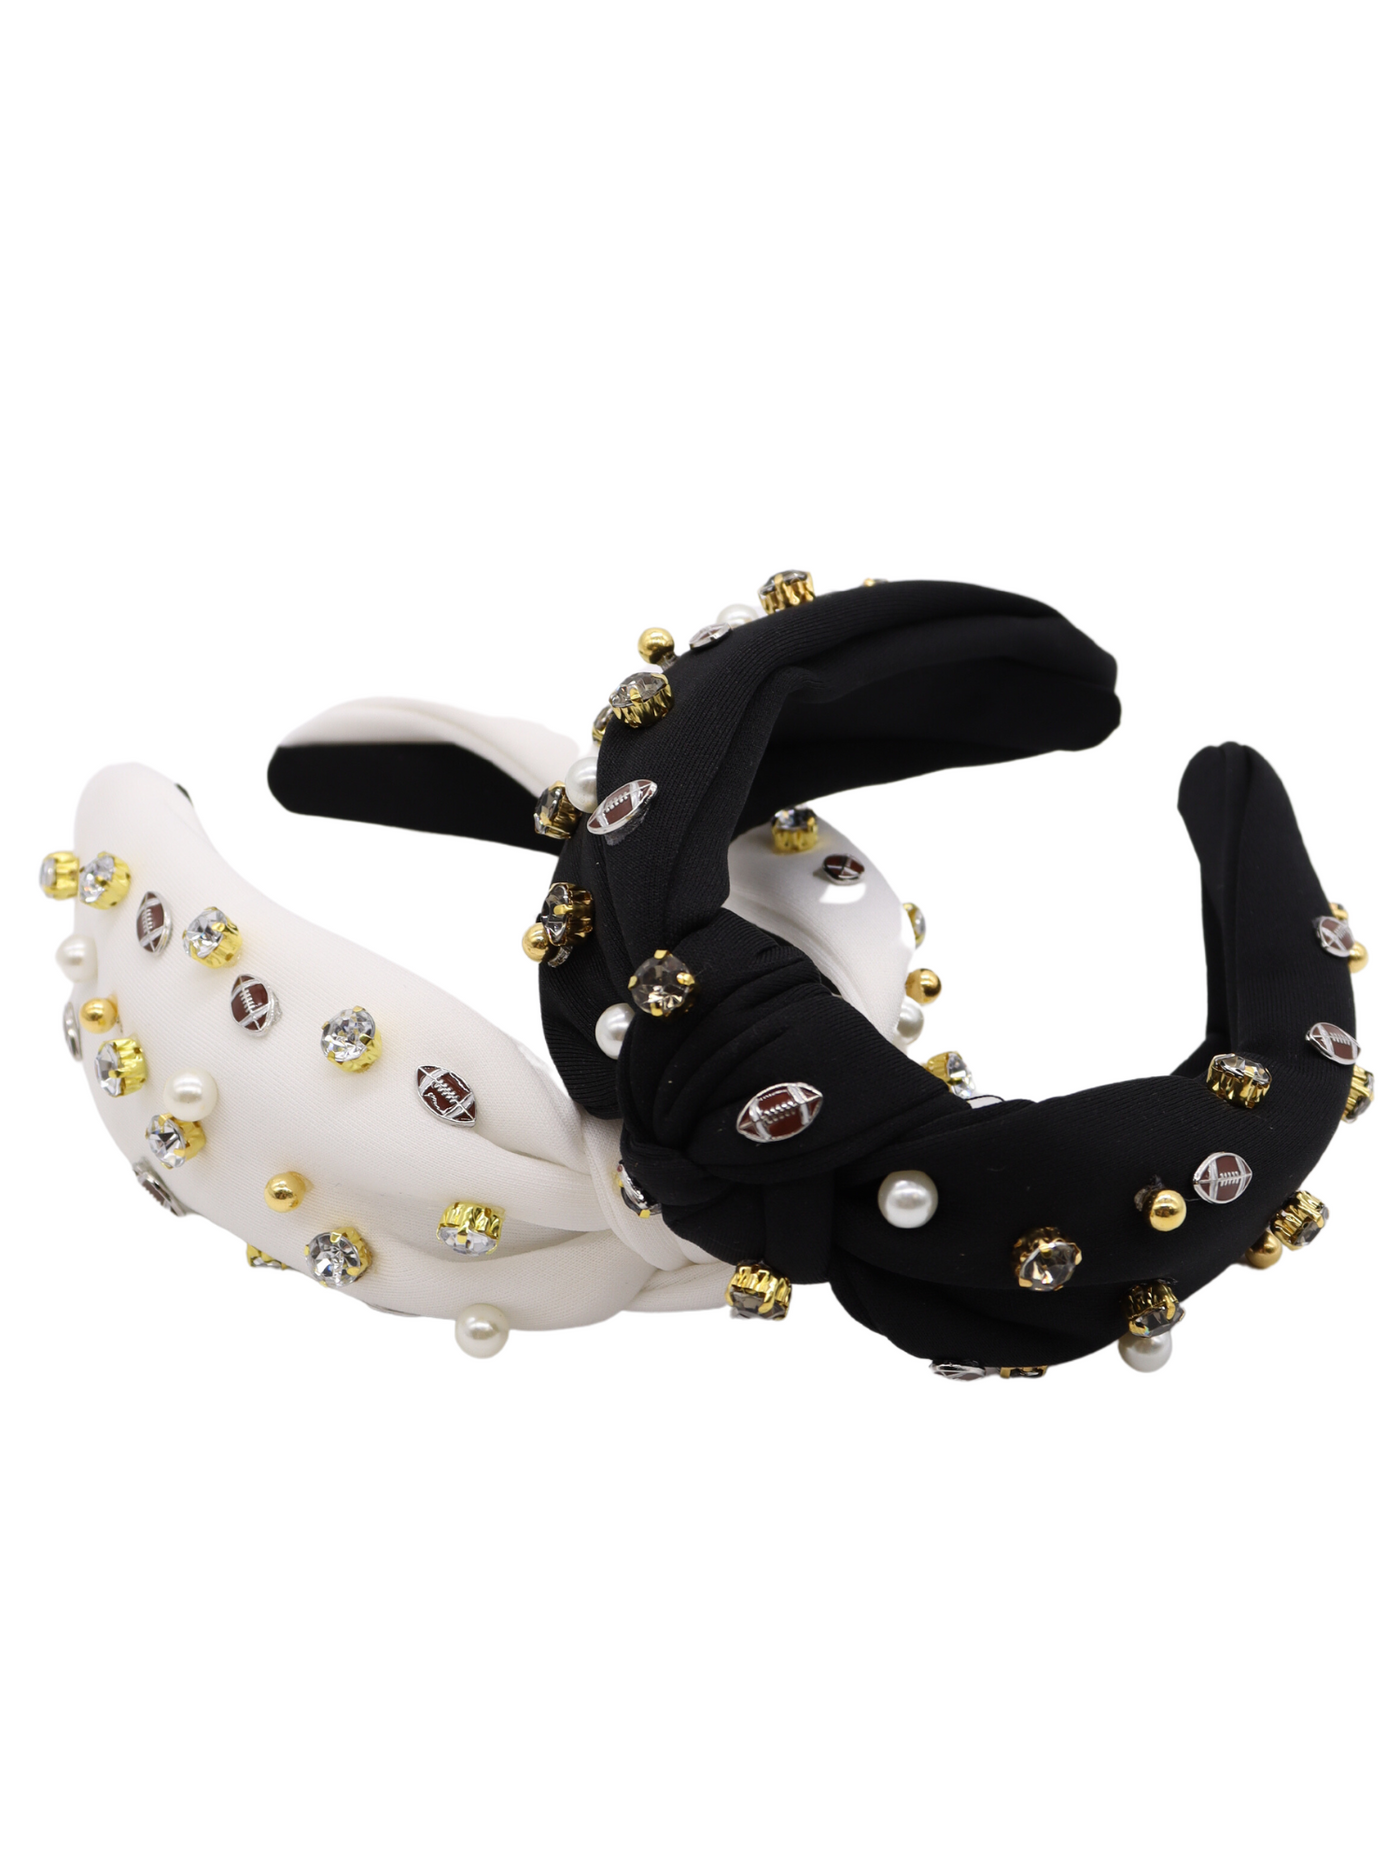 White and Black Football and Crystal Headbands